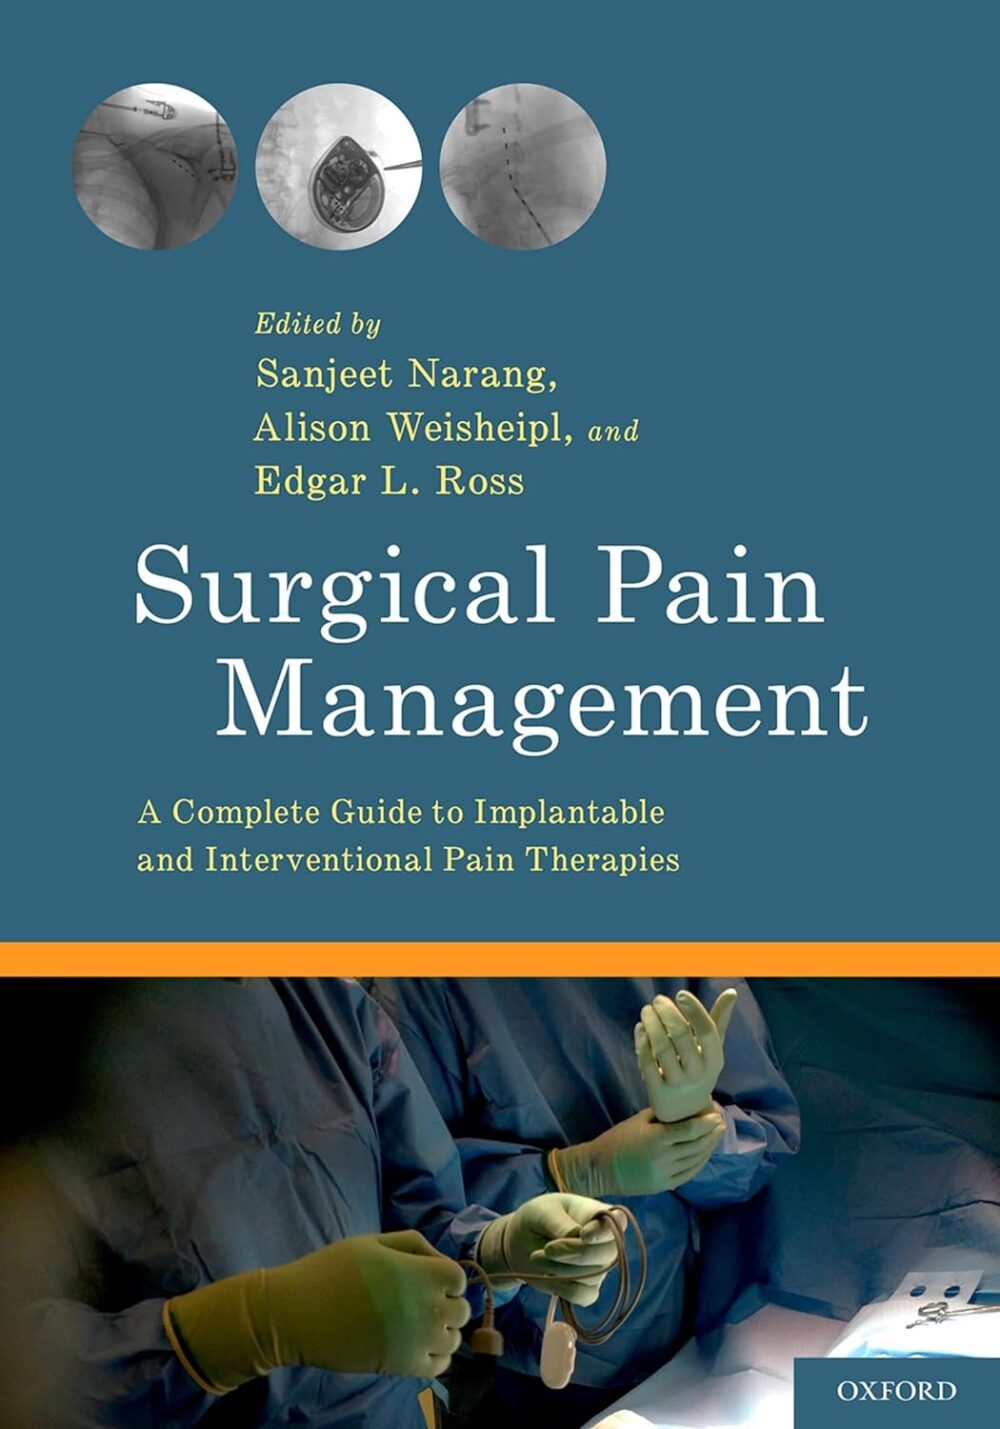 Surgical Pain Management A Complete Guide to Implantable and Interventional Pain Therapies 1st Edition